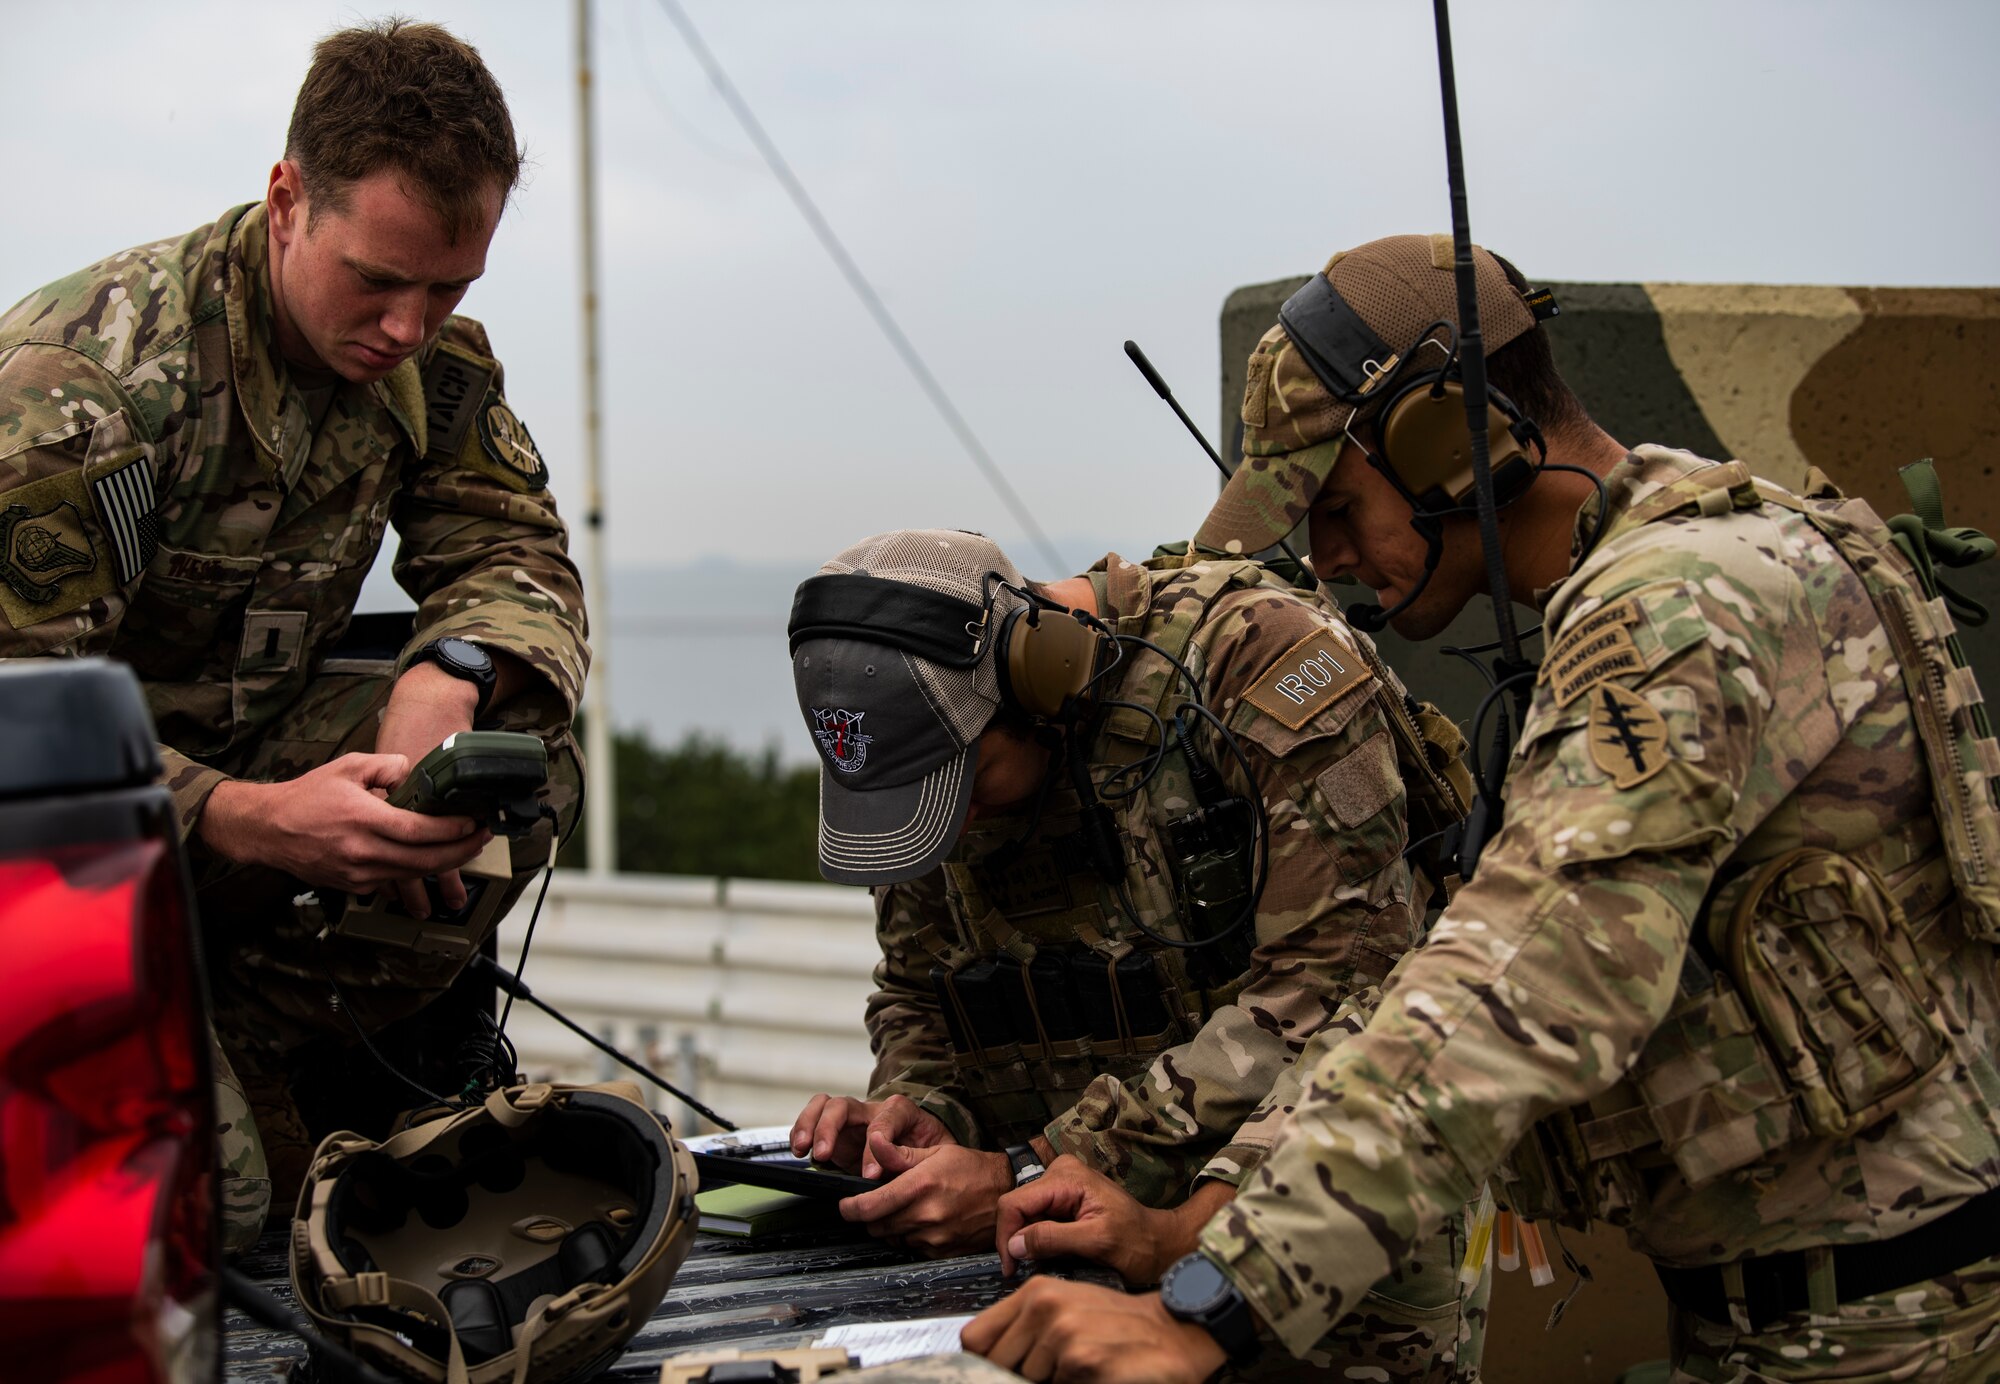 U.S. Air Force 1st Lt. Clay West, air liaison officer from the 15th Air Support Operations Squadron, Fort Stewart, Georgia (left), calibrates a laser range finder for two U.S. Army soldiers from the 7th Special Forces Group Sept. 13, 2018 at Kunsan Air Base, Republic of Korea. West evaluated and coached the soldiers through communicating and directing live aircraft for a simulated air strike. (U.S. Air Force photo by Senior Airman Stefan Alvarez)